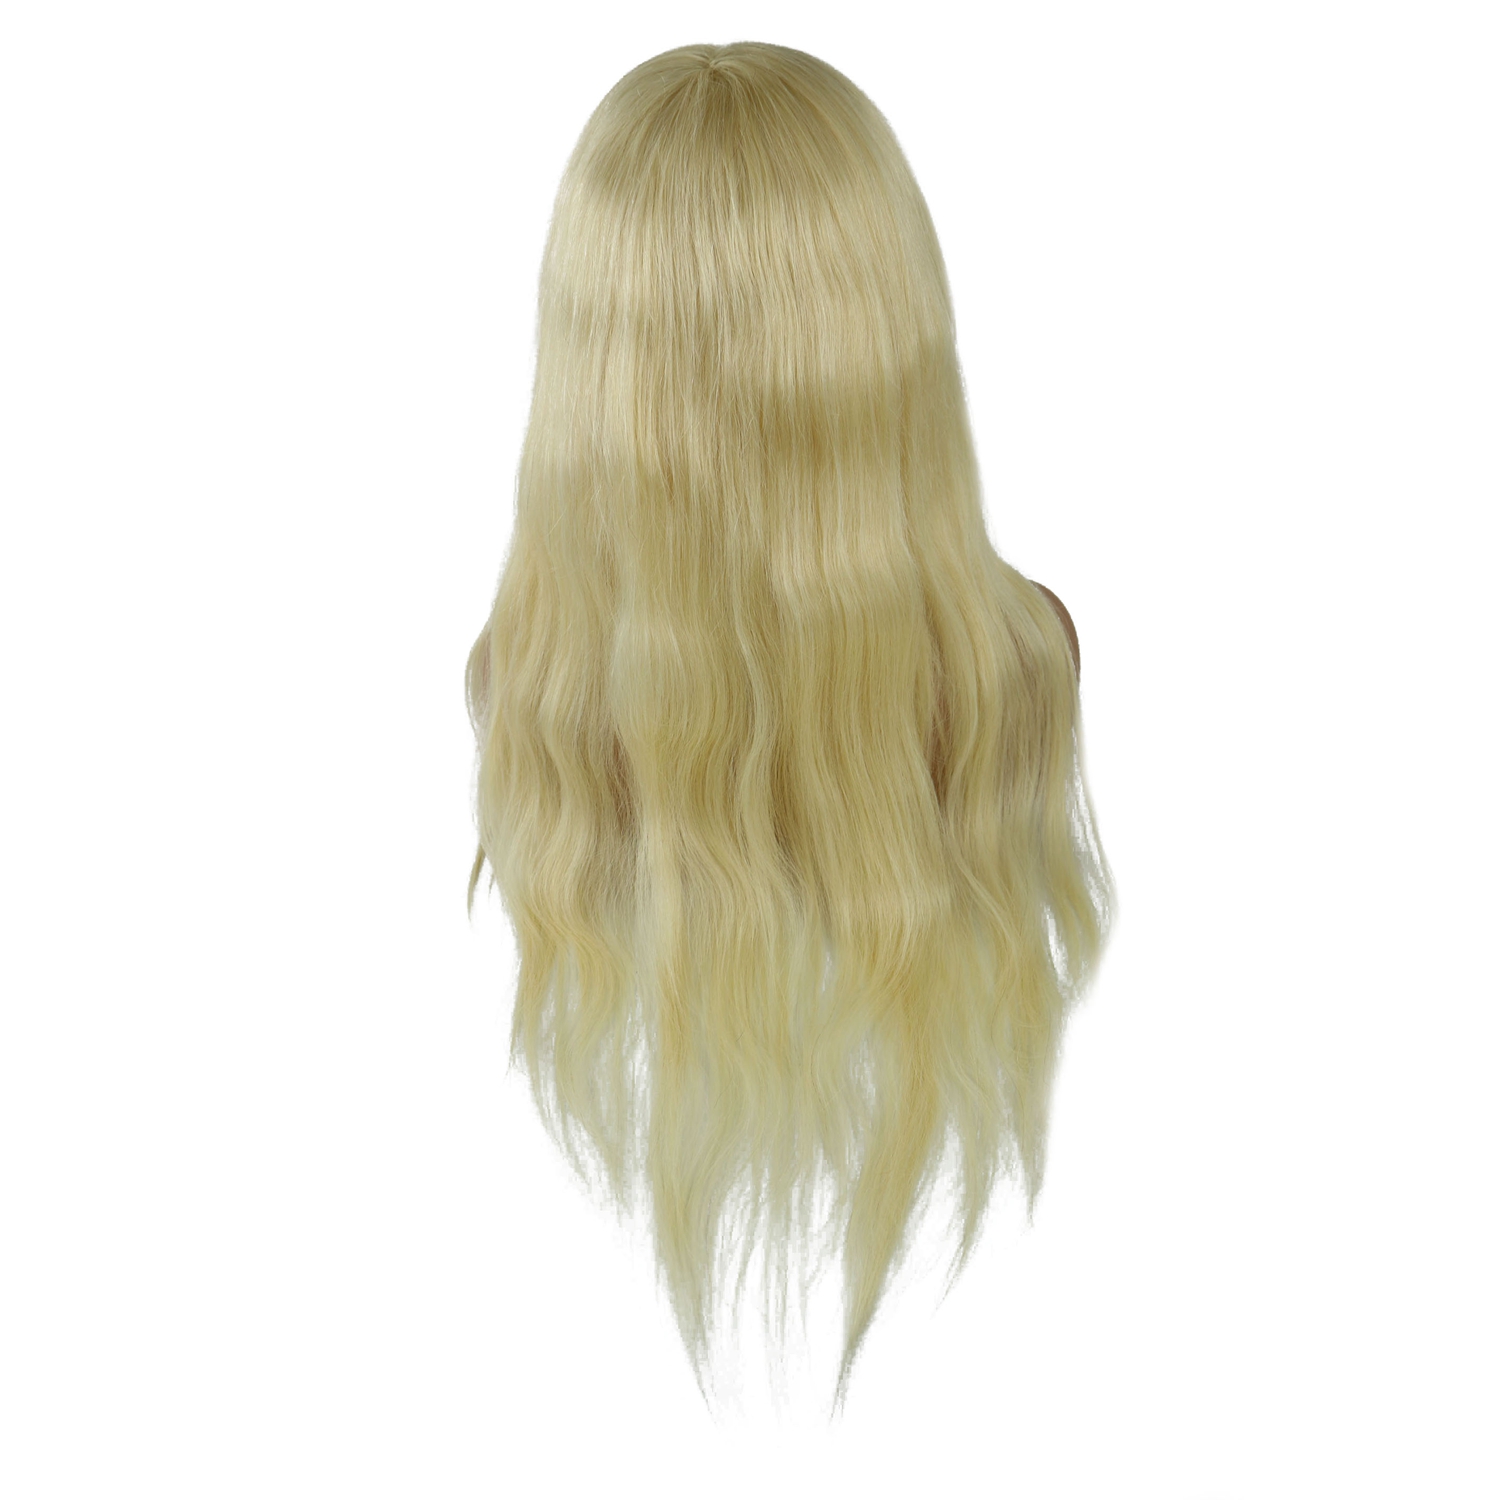 Long Loose Straight With Bangs 100% Human Hair Capless 24 Inches Wigs